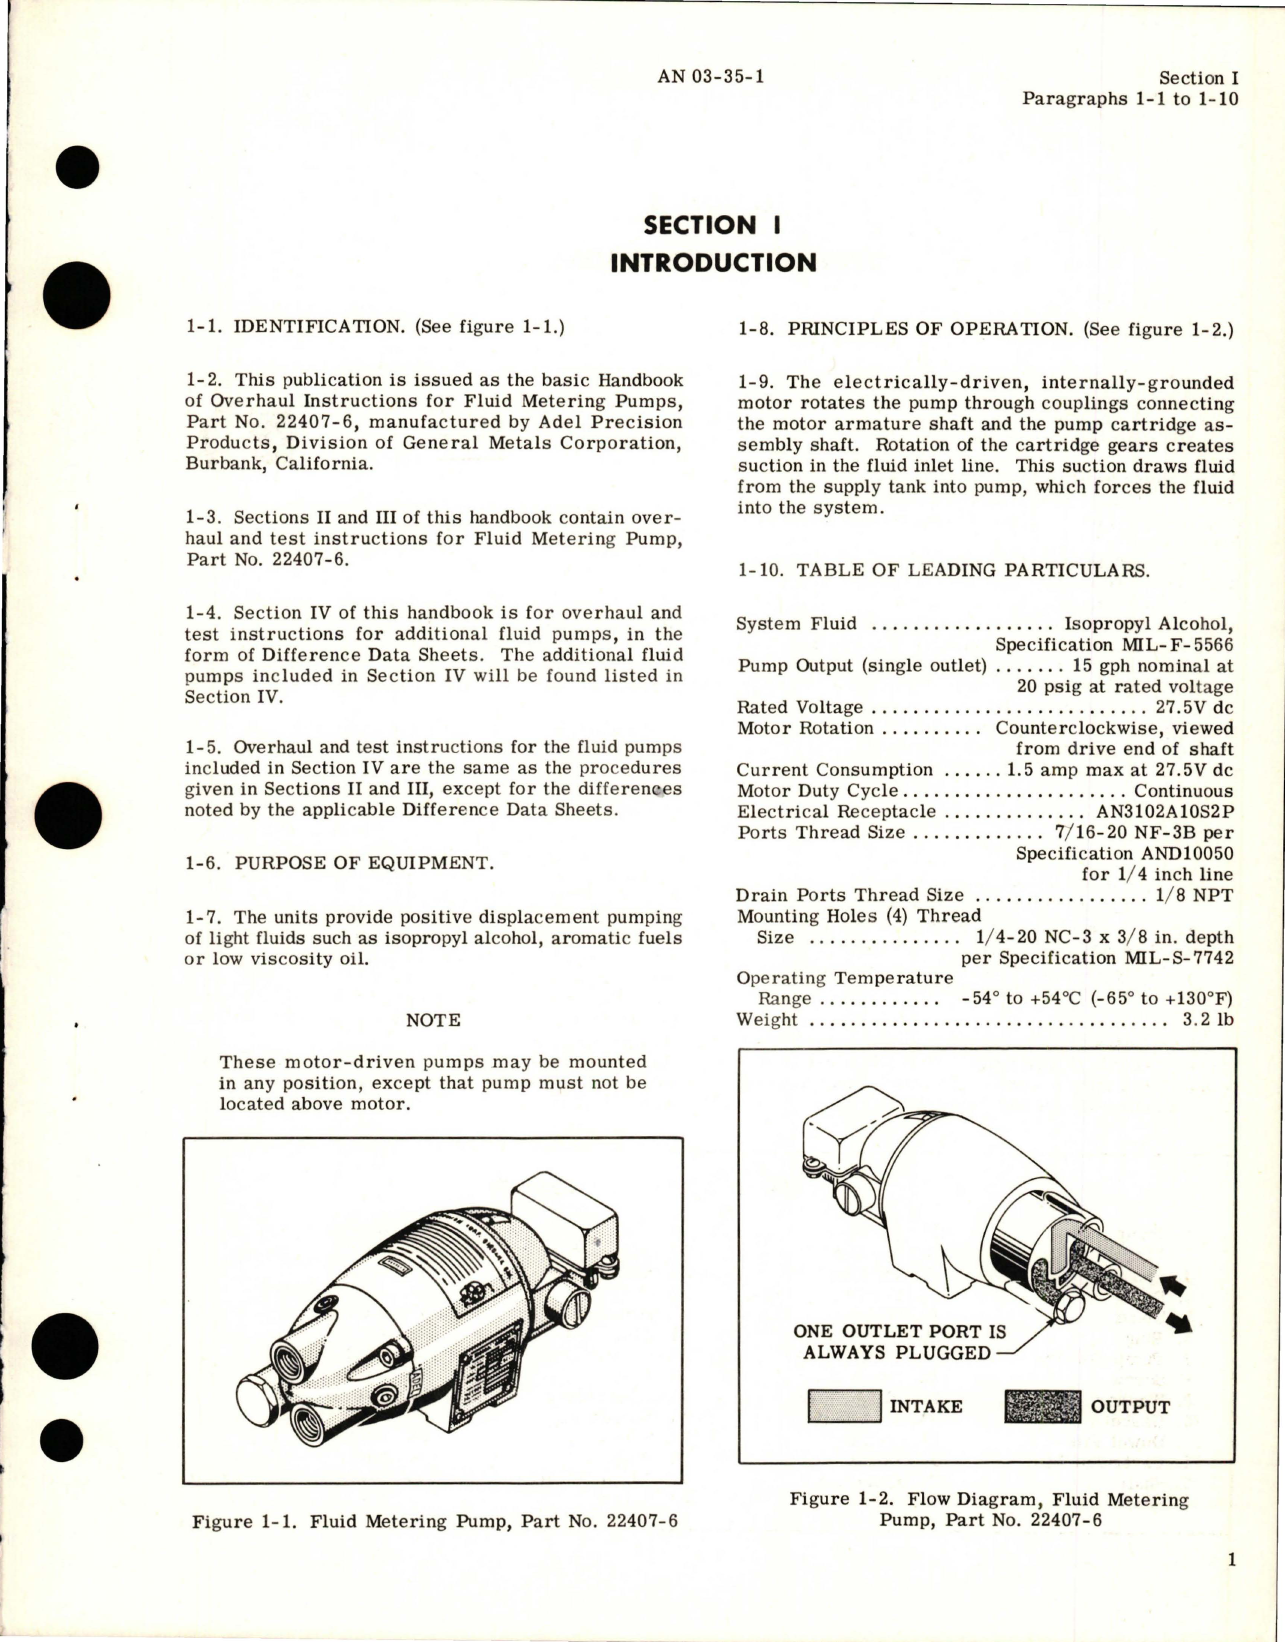 Sample page 5 from AirCorps Library document: Overhaul Instructions for Fluid Metering Pumps - Parts 22407-1, 22407-2, and 22407-6 